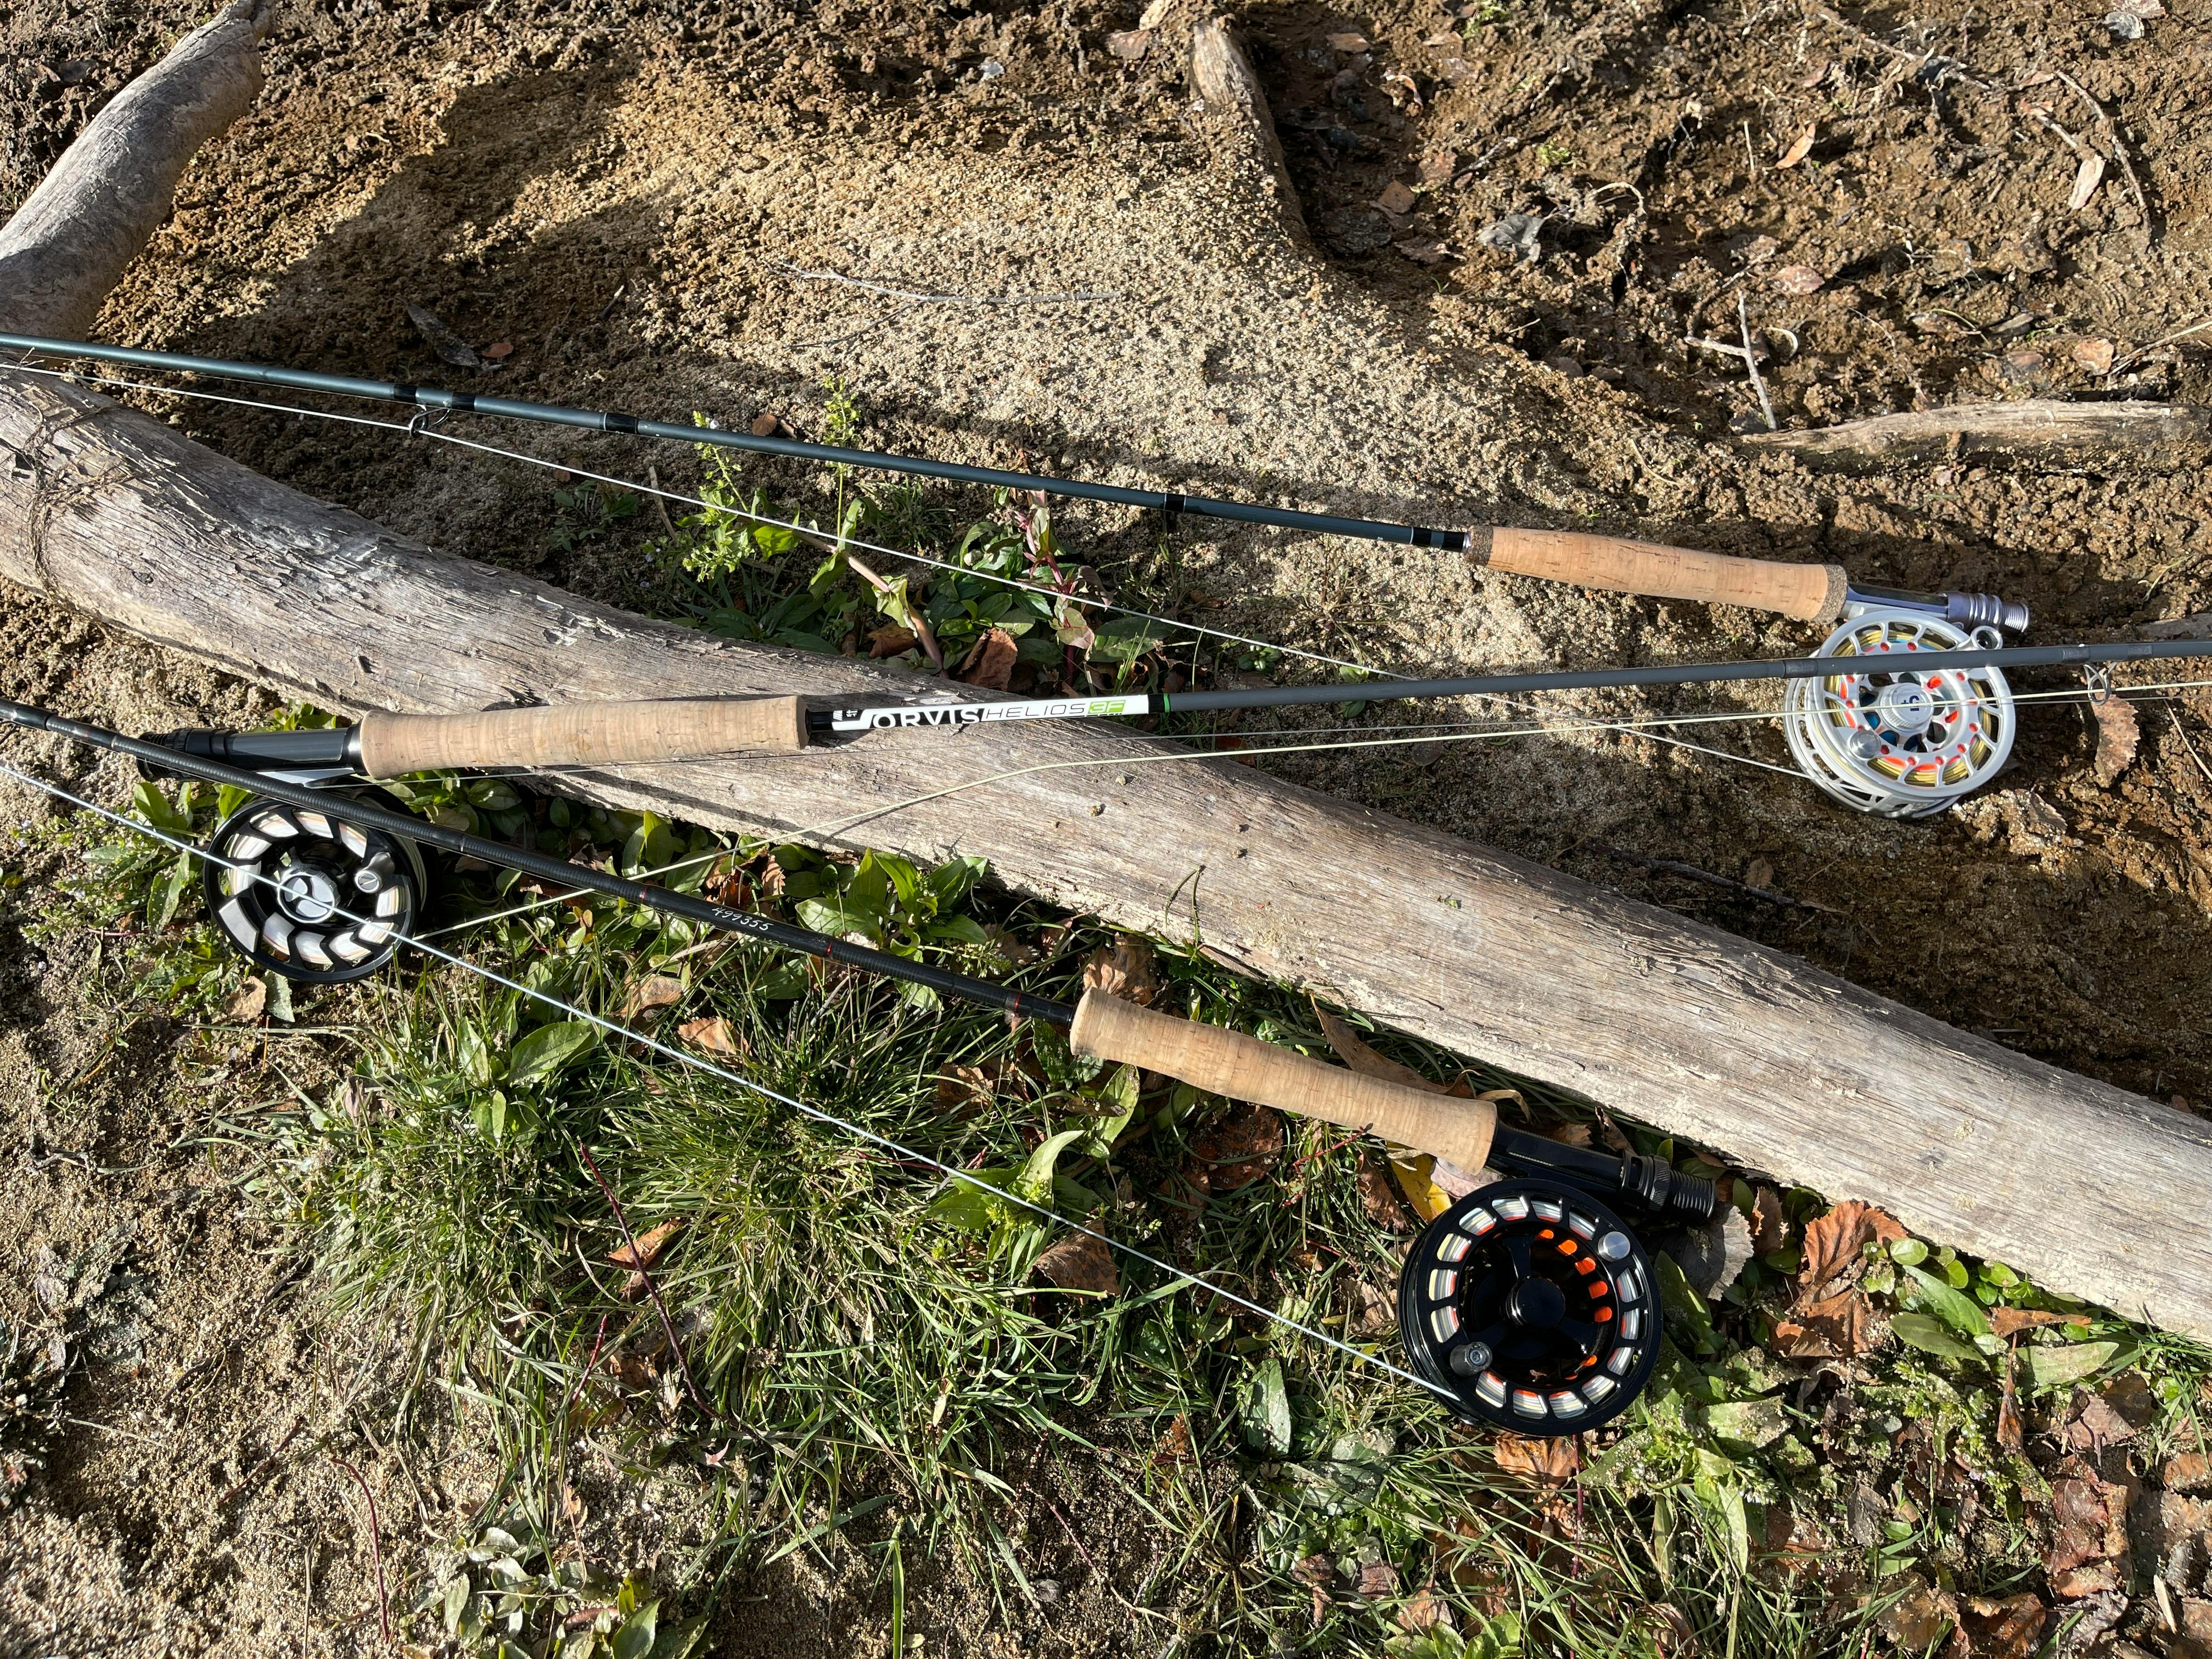 Three fly rods lie on the ground.